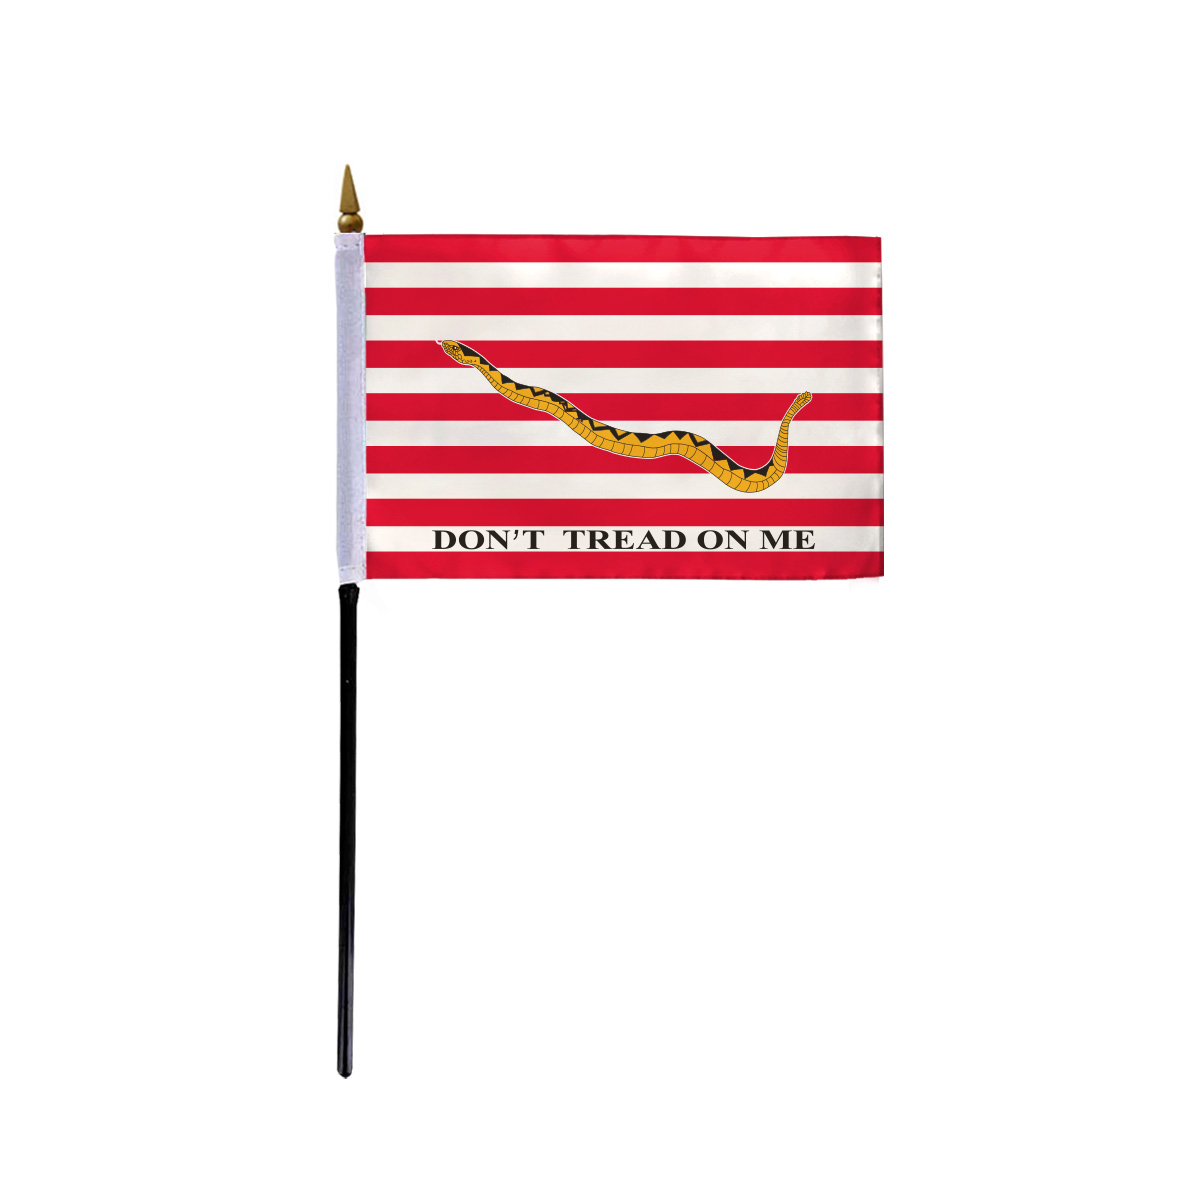 Honor American History:"Those that fail to learn from history are doomed to repeat it".Show pride in your past with our collection of American historical stick flags. Size: Miniature first navy jack flag measuring 4" x 6" inch securely attached to a 10-inch black plastic staff, perfect for hand-held, desk, or classroom use Material: Single-reverse, fully printed construction on 100% polyester material with bright colours. Stitching: Enjoy long-lasting beauty as each flag is meticulously sewn on all four sides for added durability and quality Finishing: Handheld navy jack flag comes fully assembled with a 10" plastic pole with elegant gold spear tips.